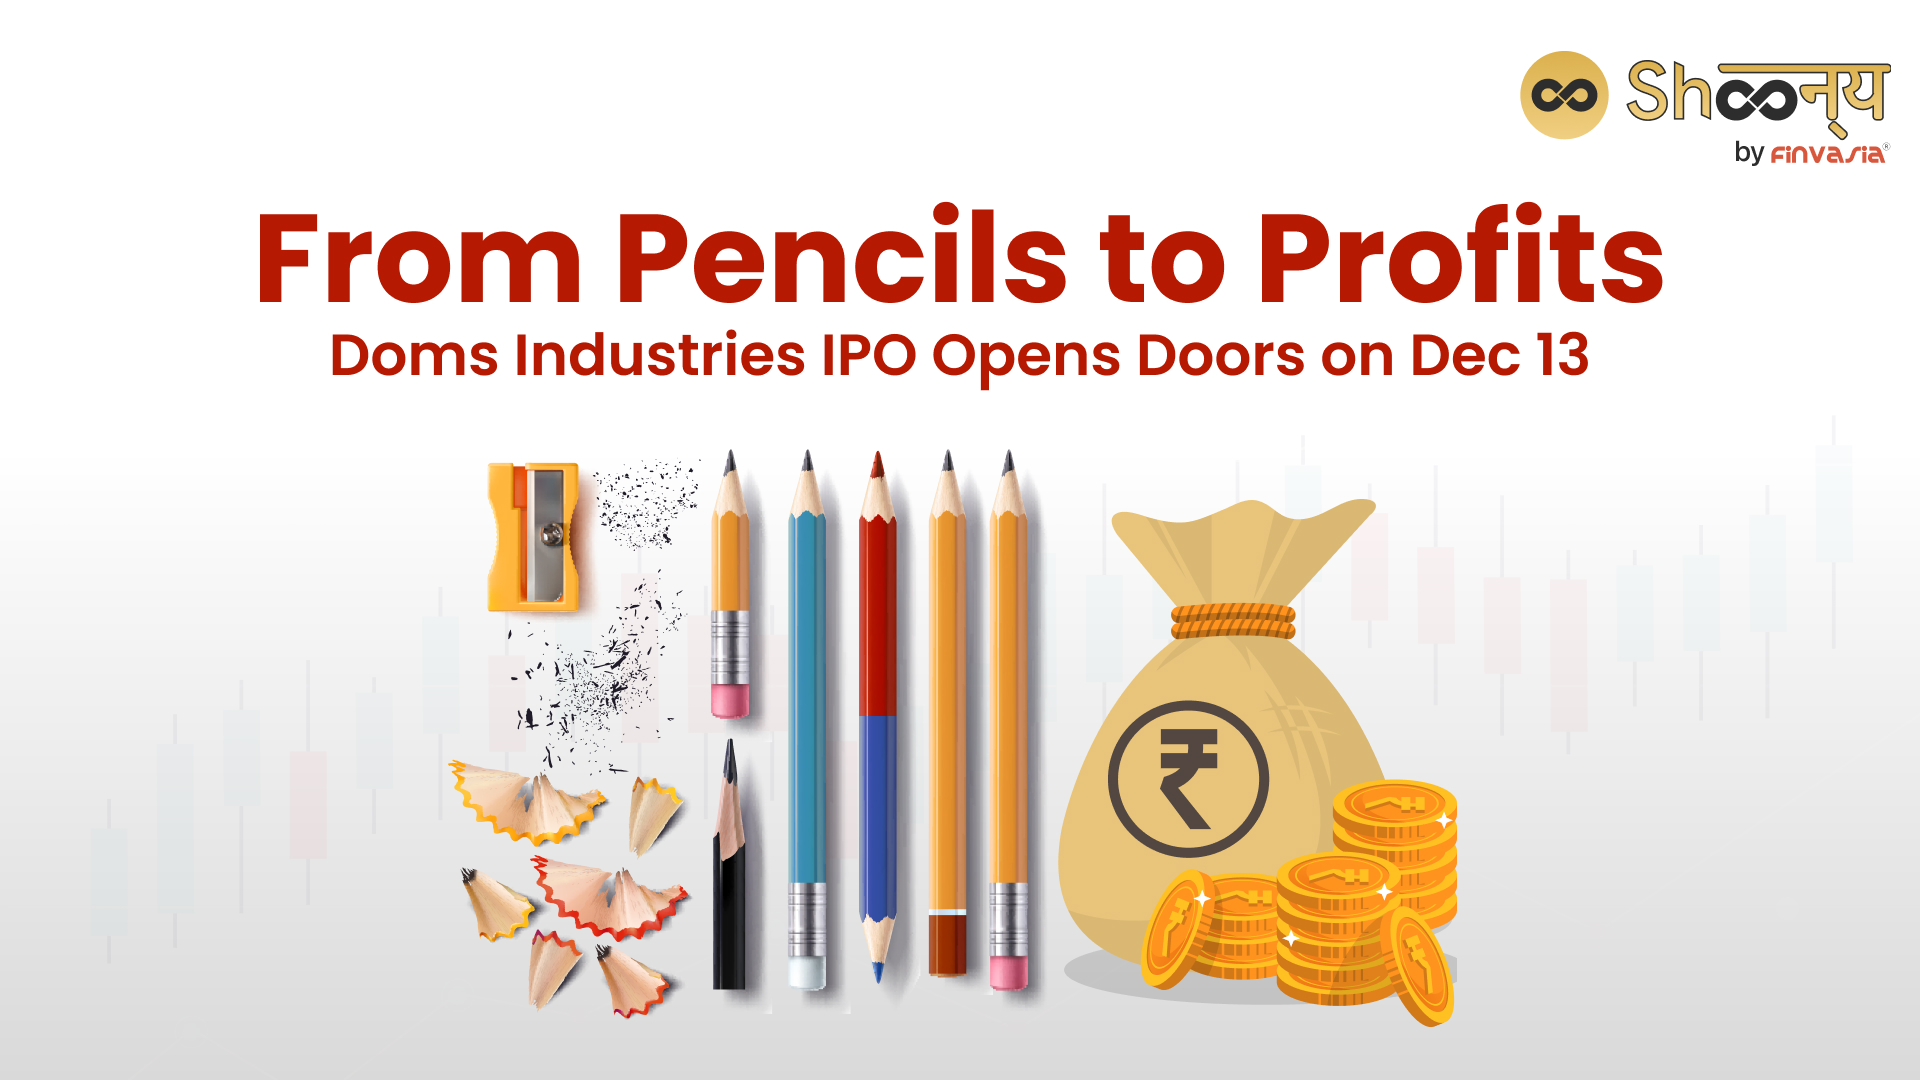 Doms Industries IPO: Launching on Dec 13 to Raise Rs 1,200 Cr